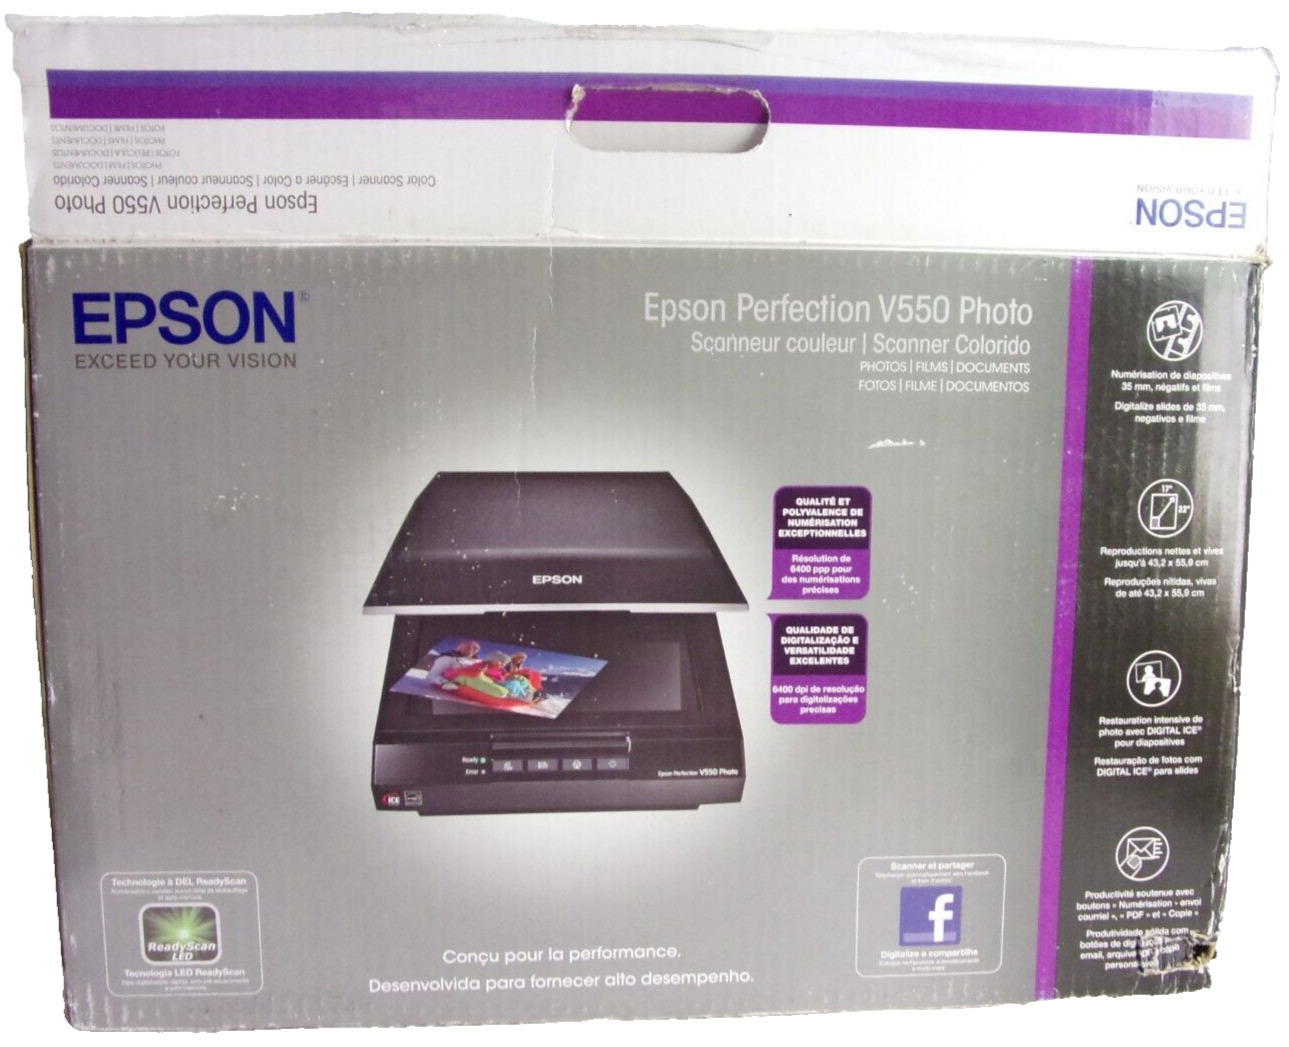 New Epson Perfection V550 Photo Color Scanner New in Damaged Box